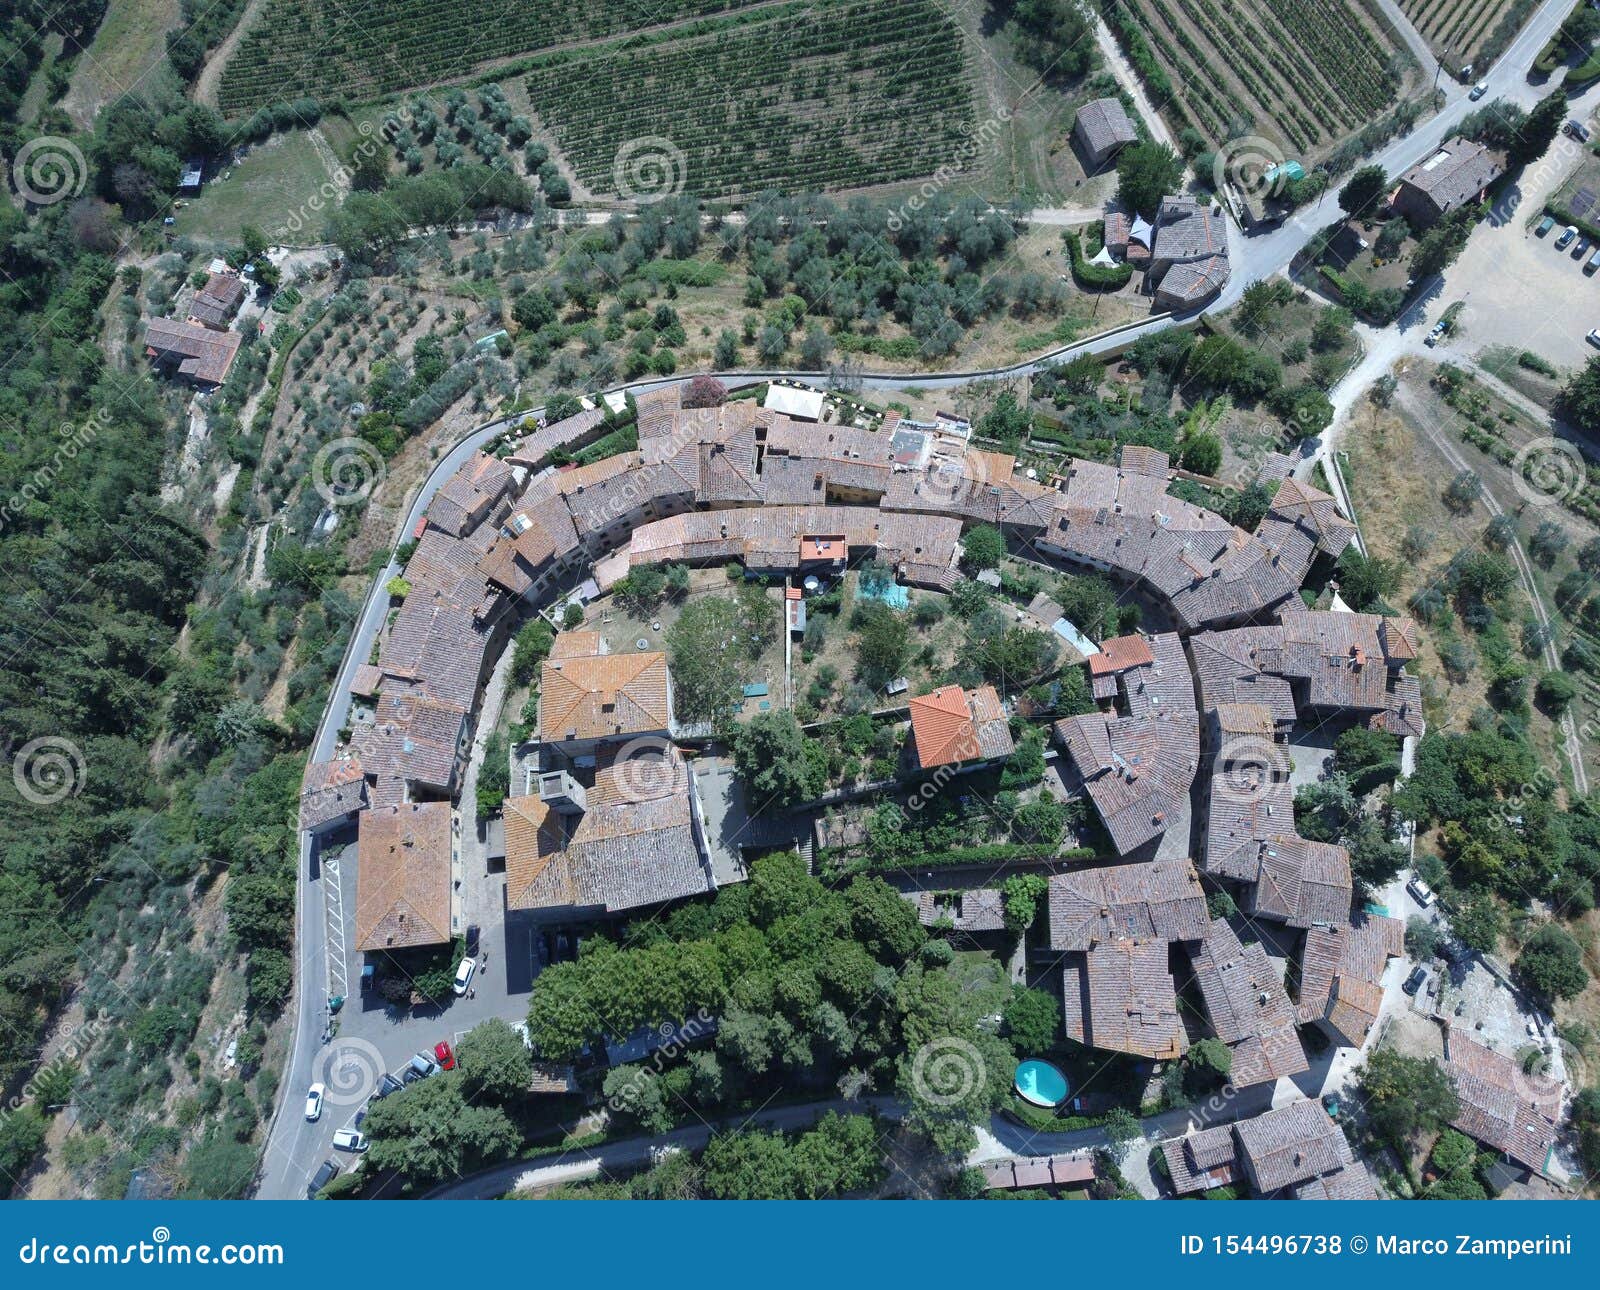 aereal view of montefioralle chianti drone